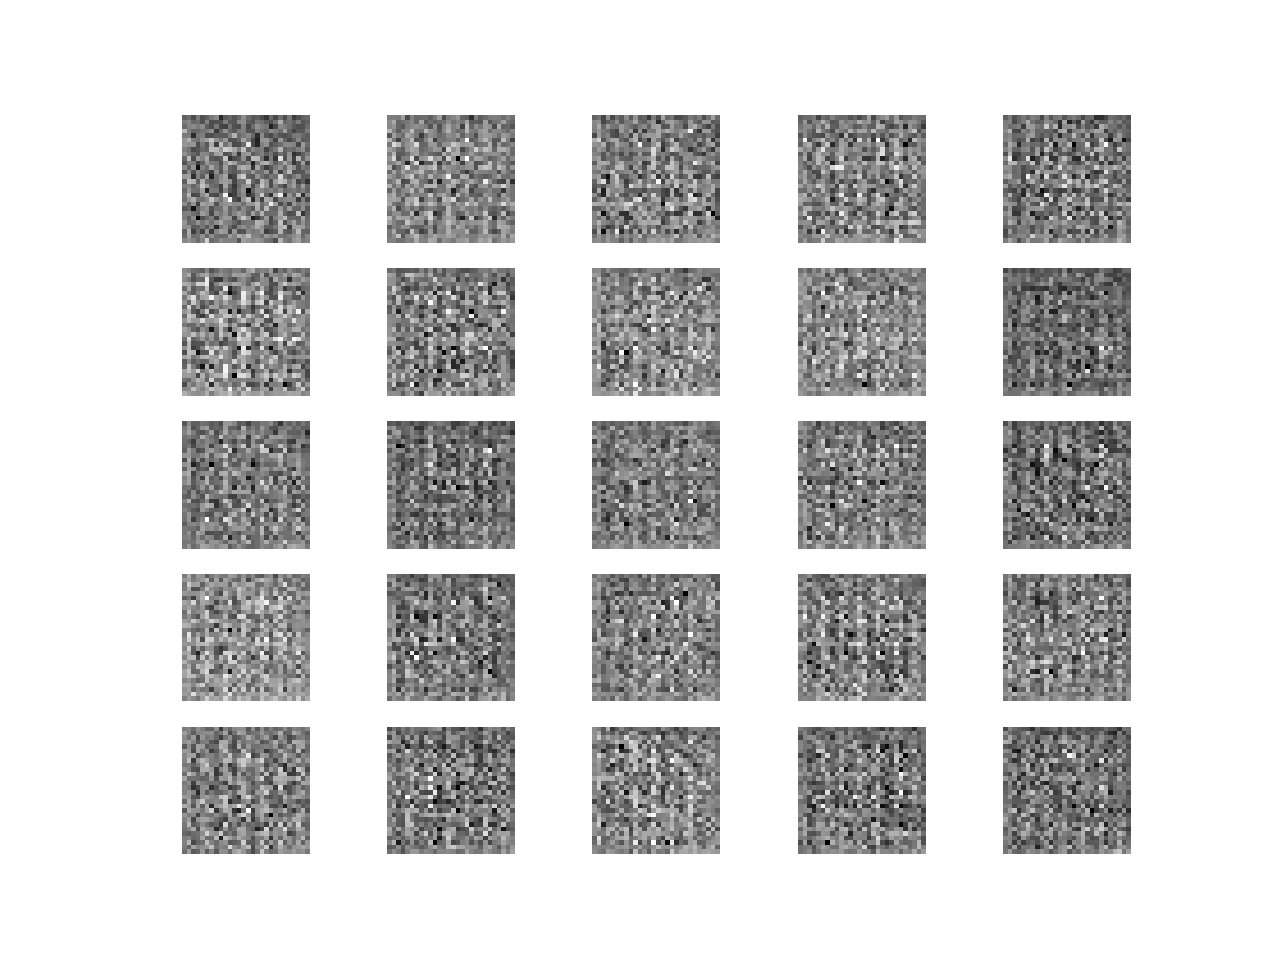 Example-of-25-MNIST-Images-Output-by-the-Untrained-Generator-Model